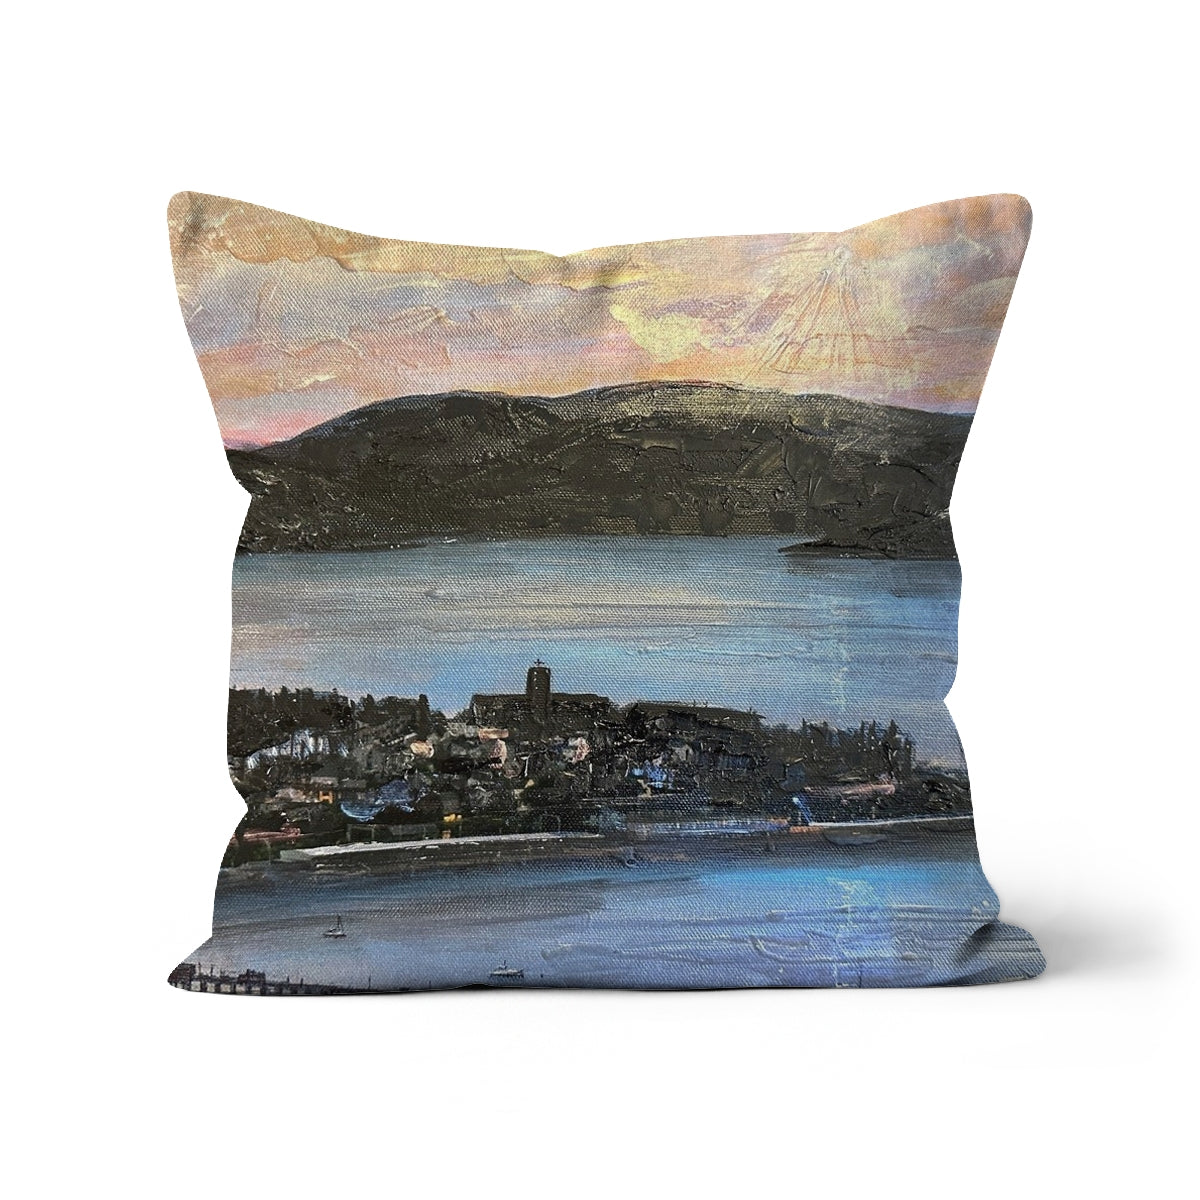 From Lyle Hill Art Gifts Cushion-Cushions-River Clyde Art Gallery-Linen-12"x12"-Paintings, Prints, Homeware, Art Gifts From Scotland By Scottish Artist Kevin Hunter